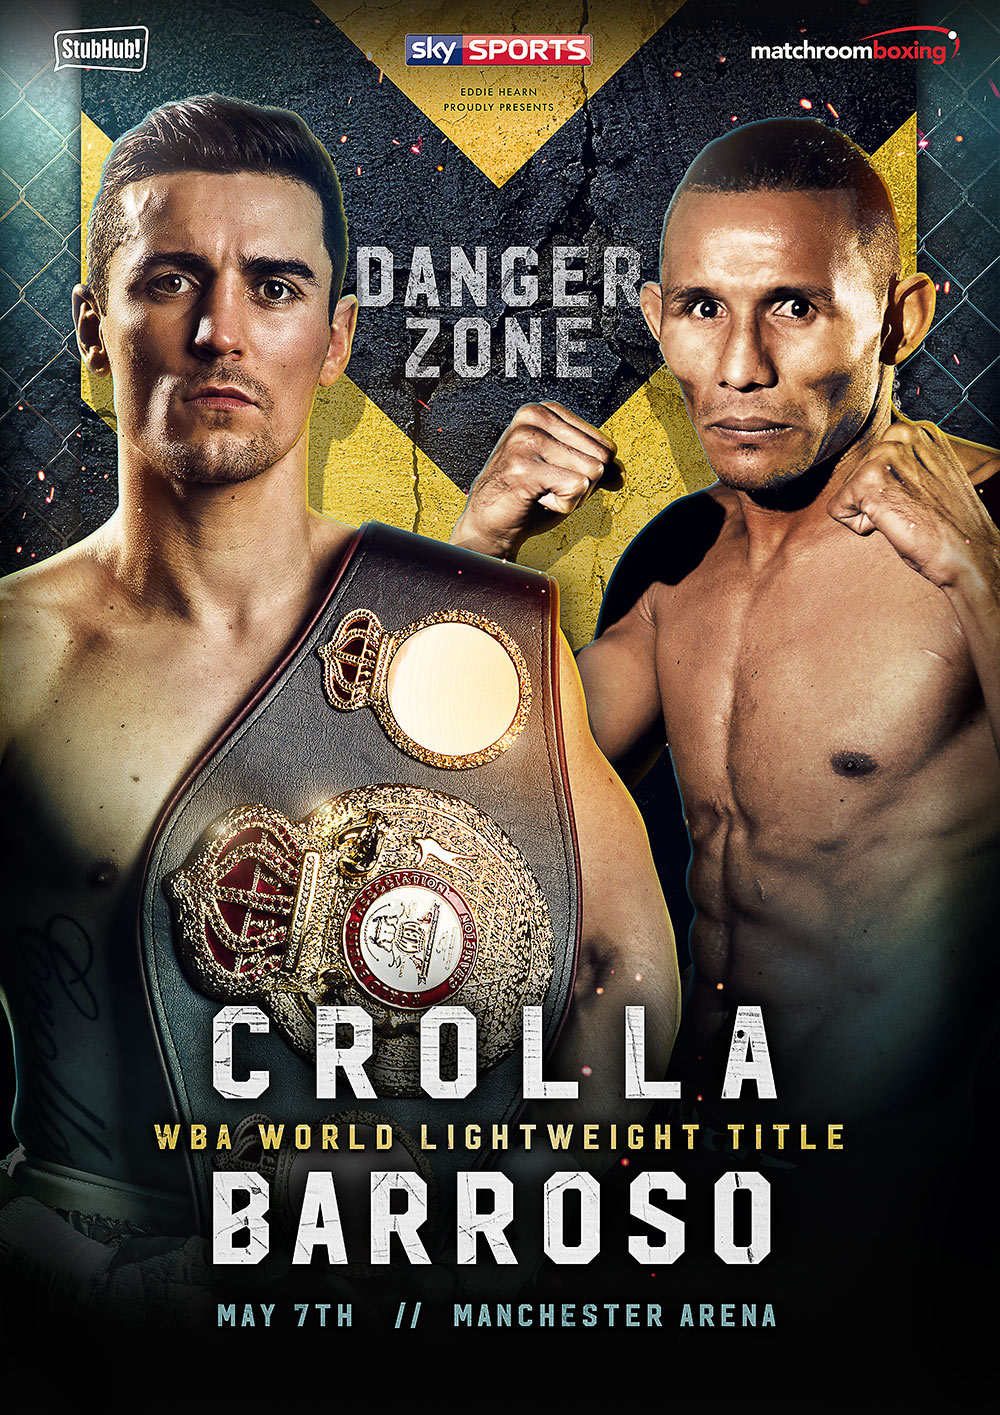 anthony crolla ismael barroso manchester boxing poster design